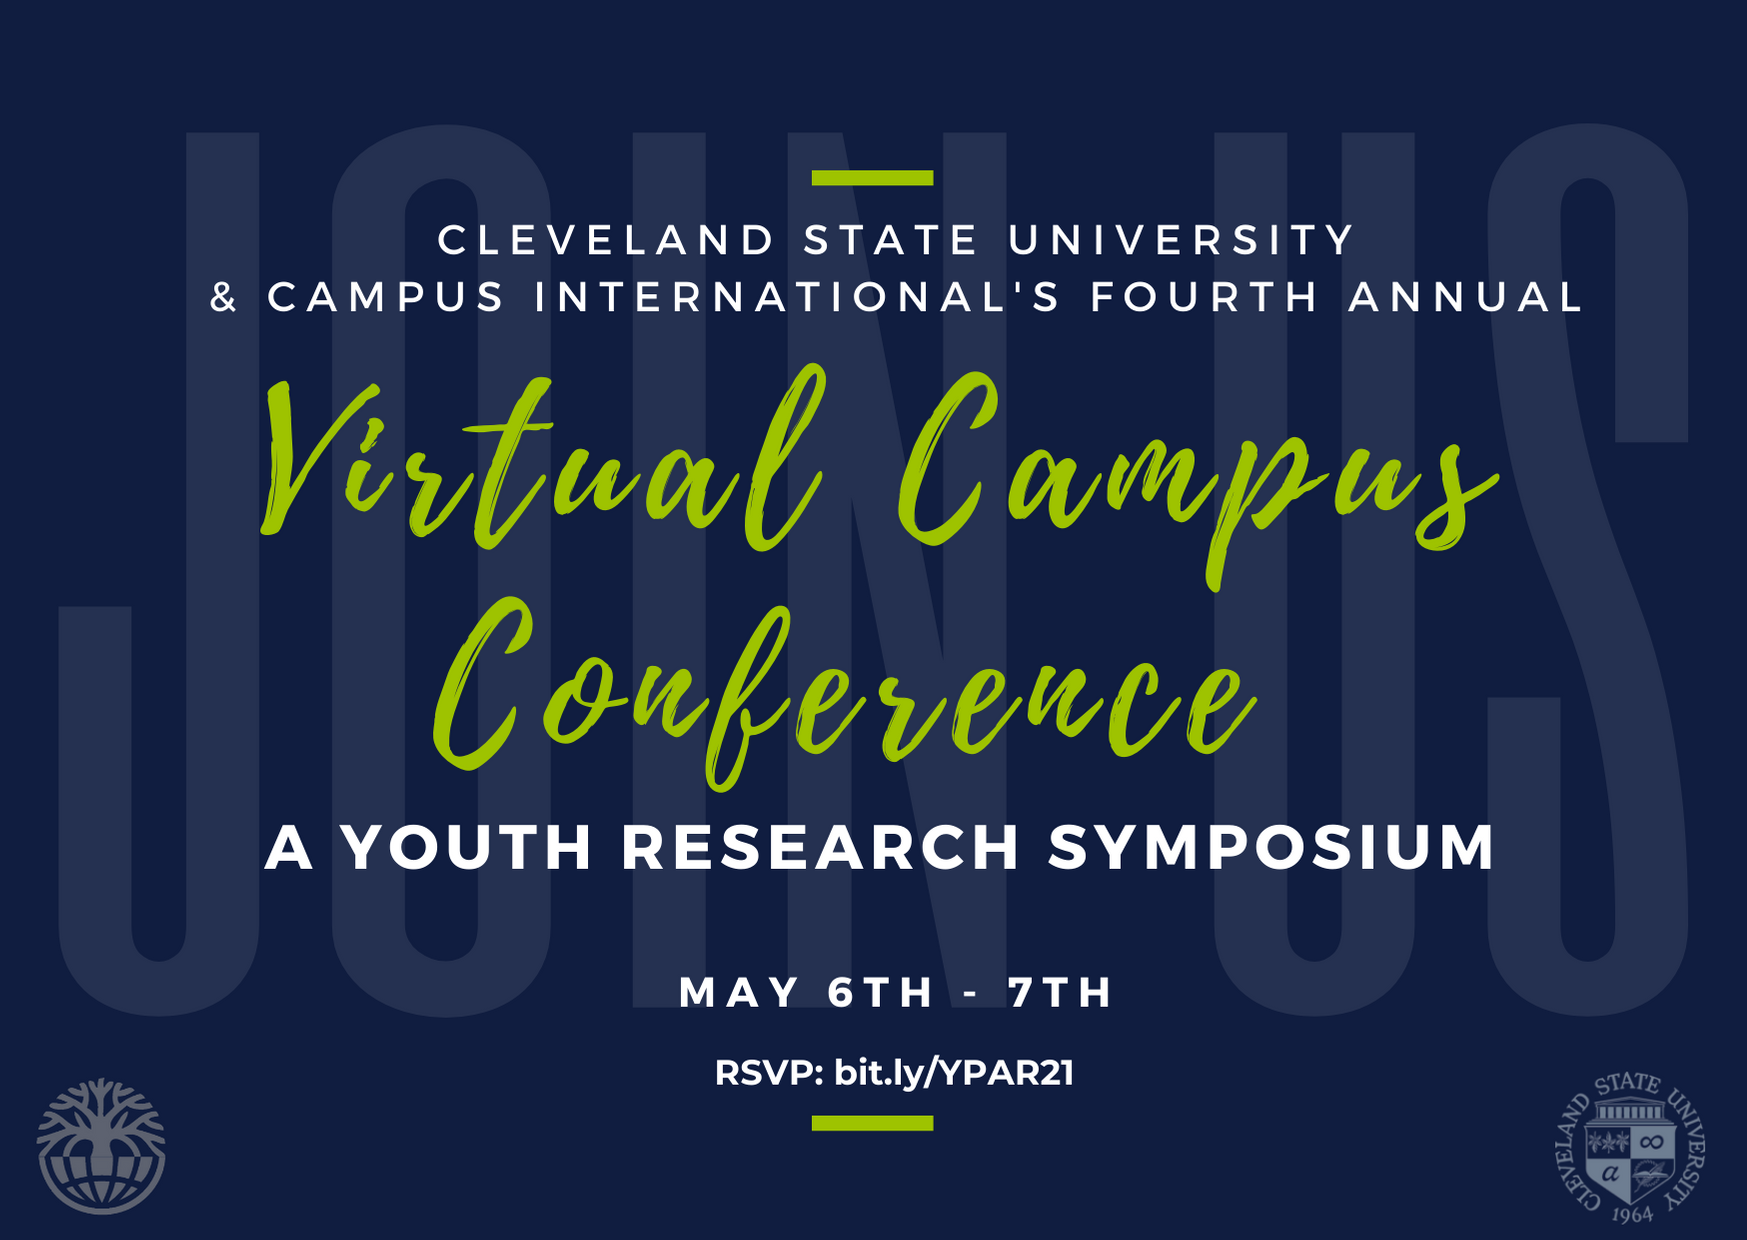 A digital save the date postcard for Campus Conference: A Youth Research Symposium